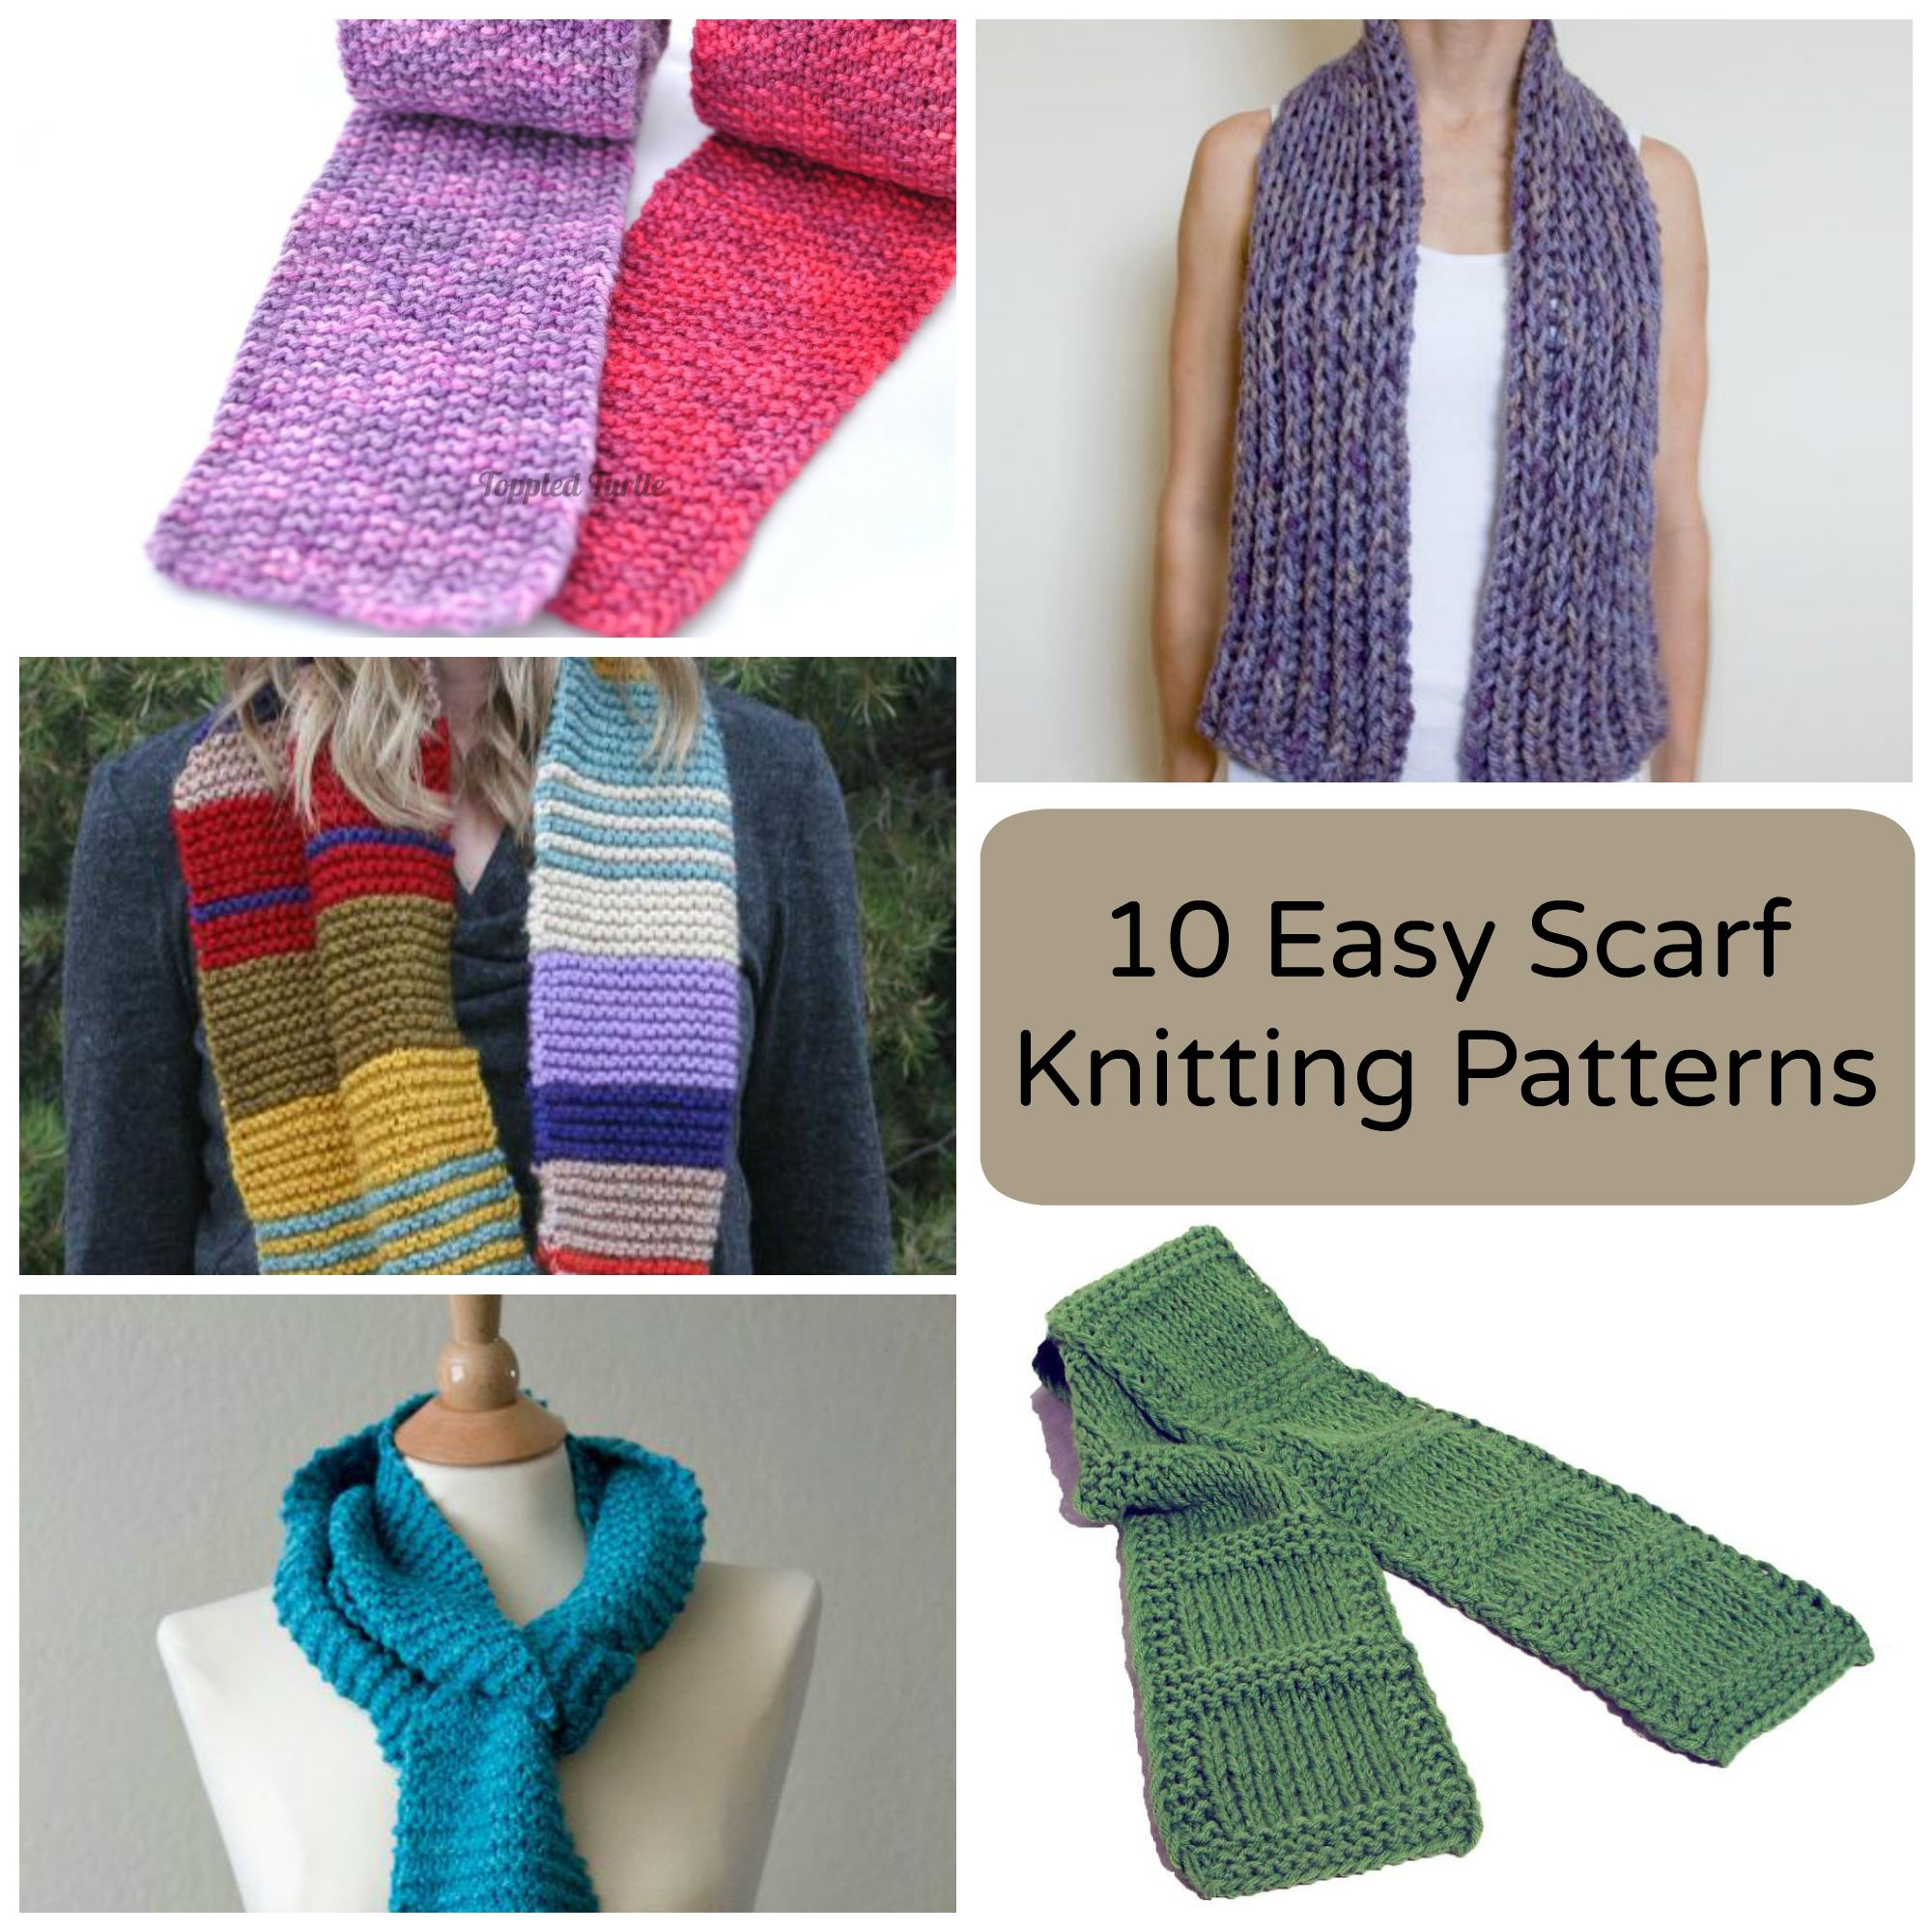 Scarf Patterns Knitting Beginner Knit A Scarf Selecting A Design From Knitted Scarf Patterns